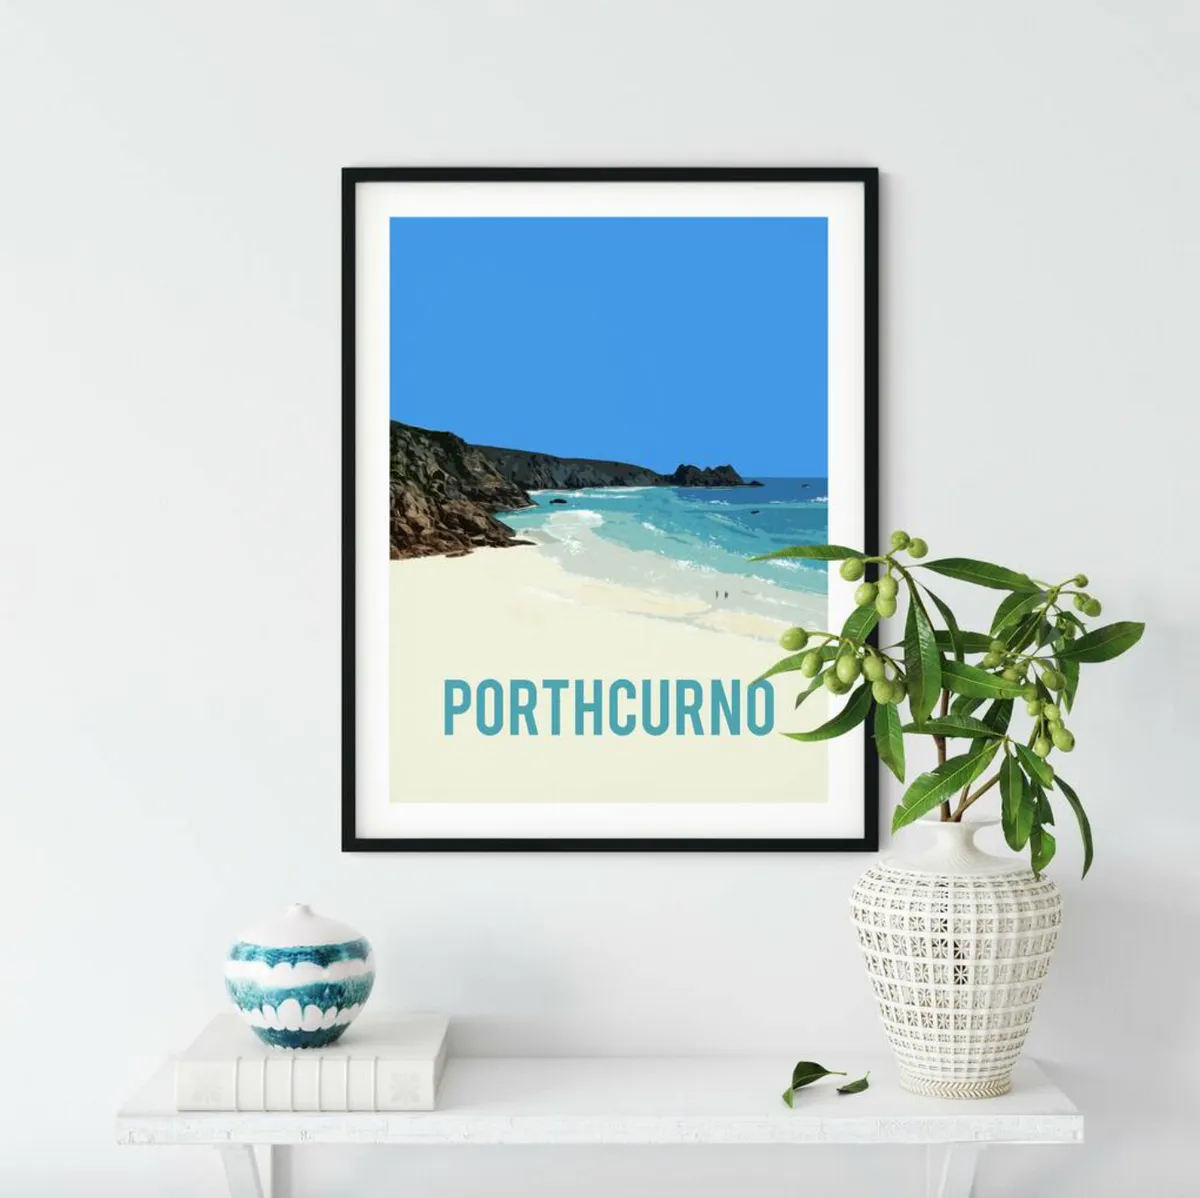 Porthcurno Fine Art Travel Poster, Not On The High Street